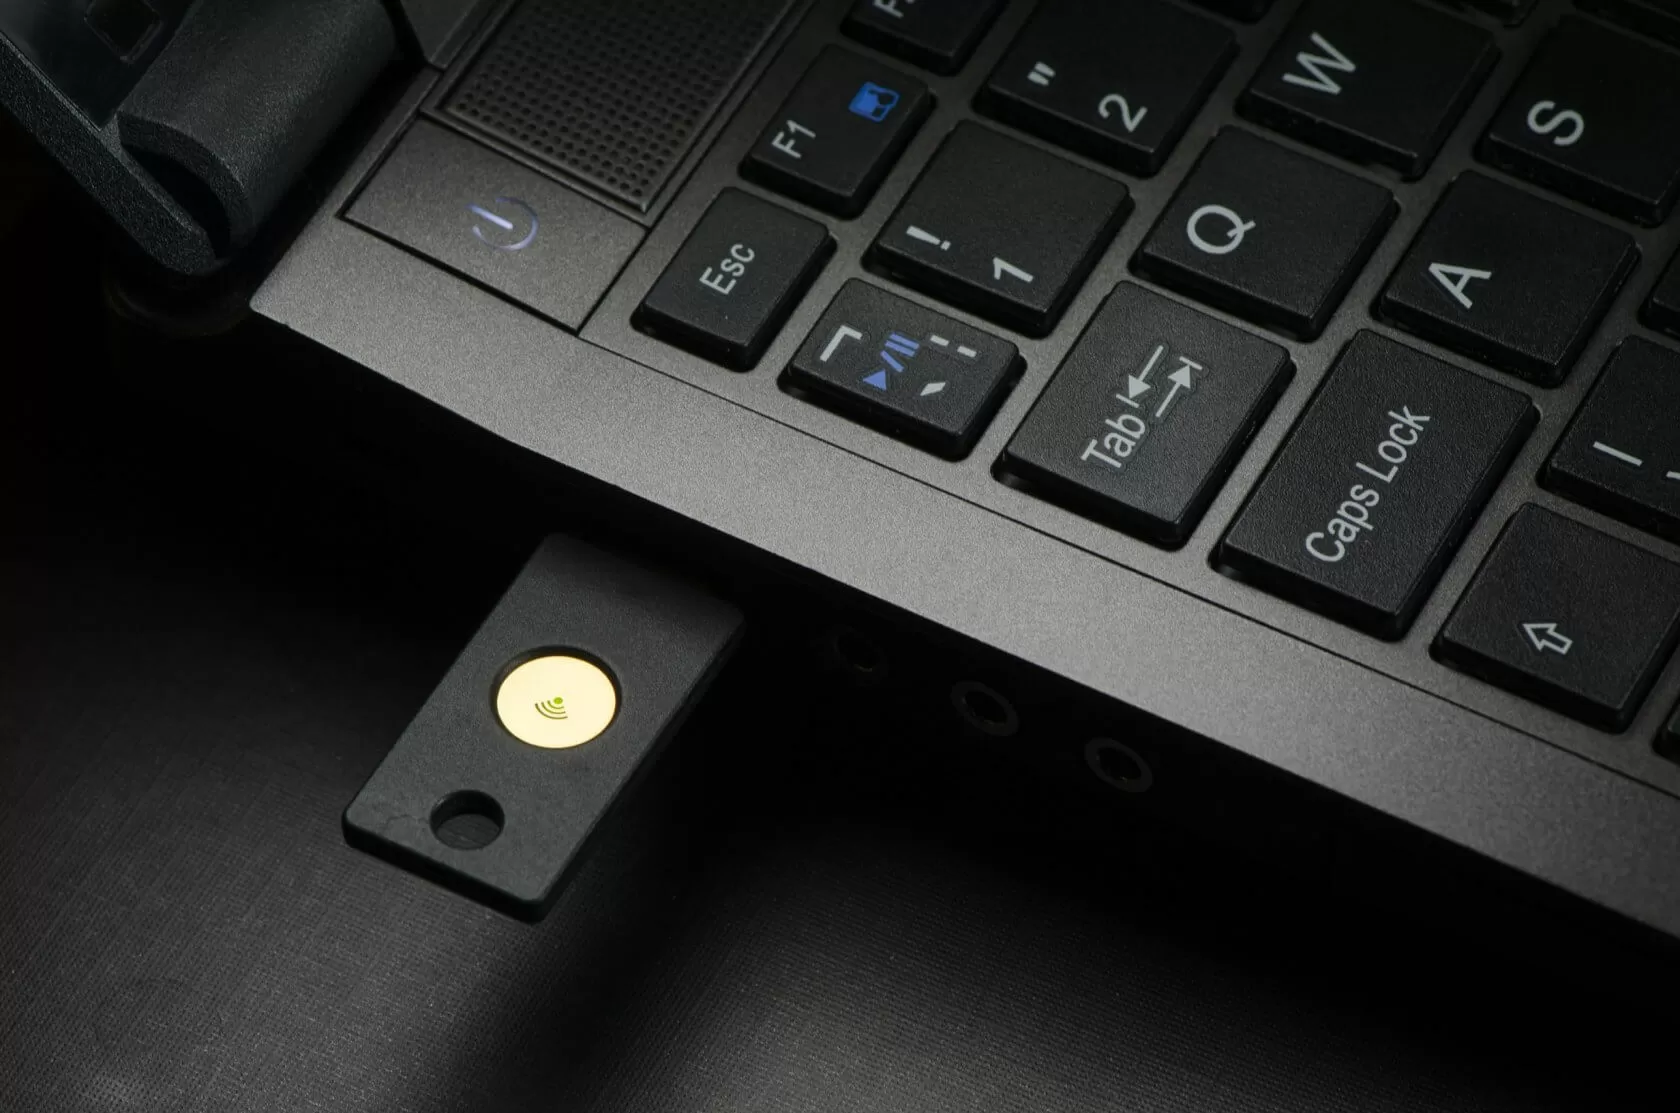 You can now sign into your Microsoft account using hardware-based security keys